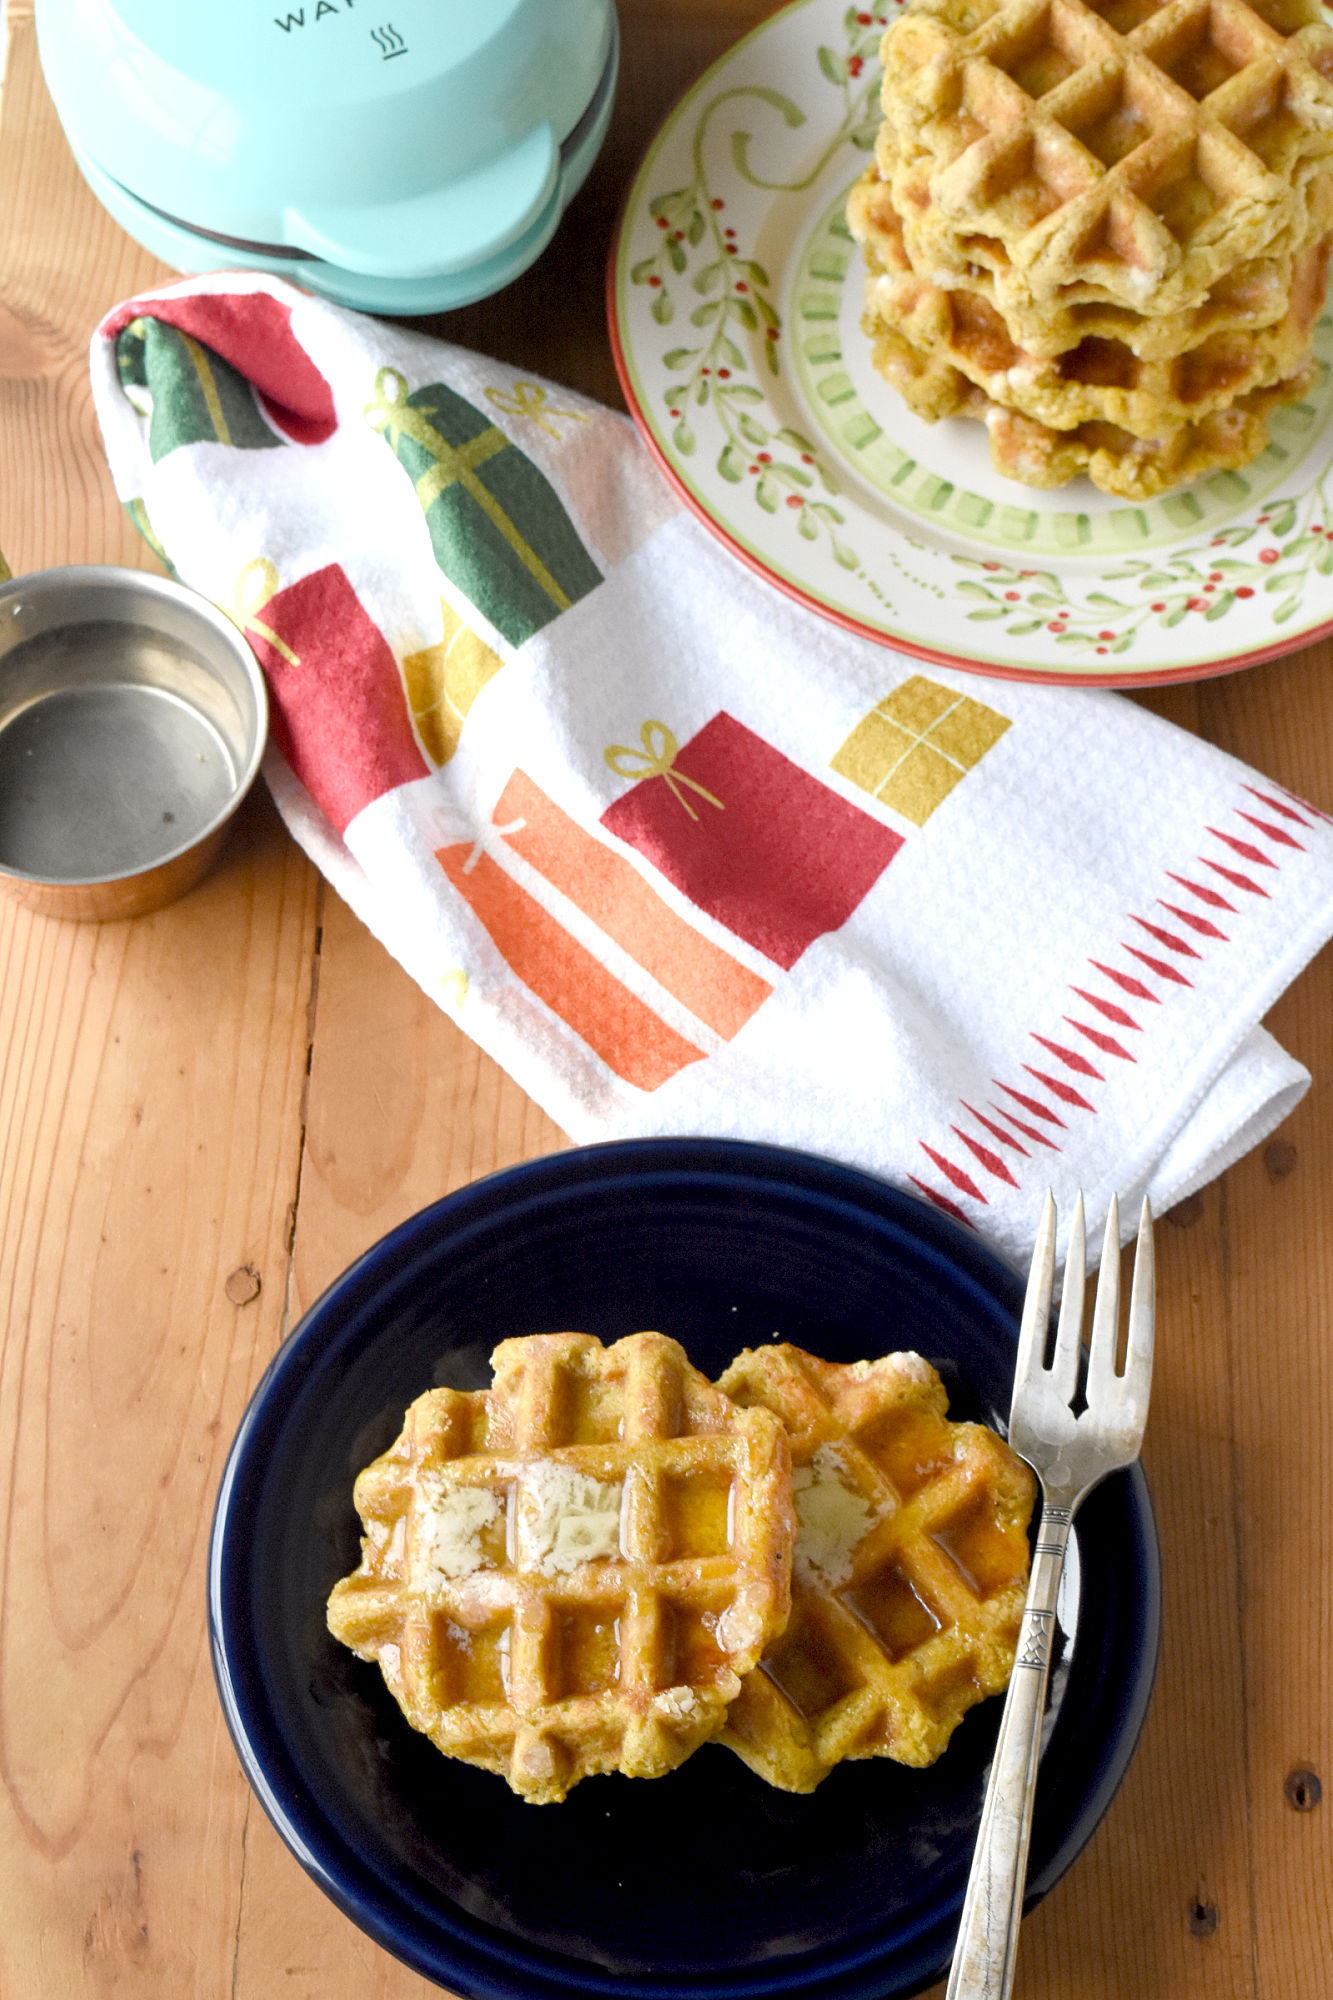 With an airy, fluffy center and a crispy caramelized crust, you will fall in love with these quick and easy Pumpkin Liége Waffles! #PumpkinLiégeWaffles #FallFlavors #AutumnEats #PumpkinSweets #YummyWaffles #FallFoodies #LiégeWaffleLove #WaffleLove #FoodieFavorites
